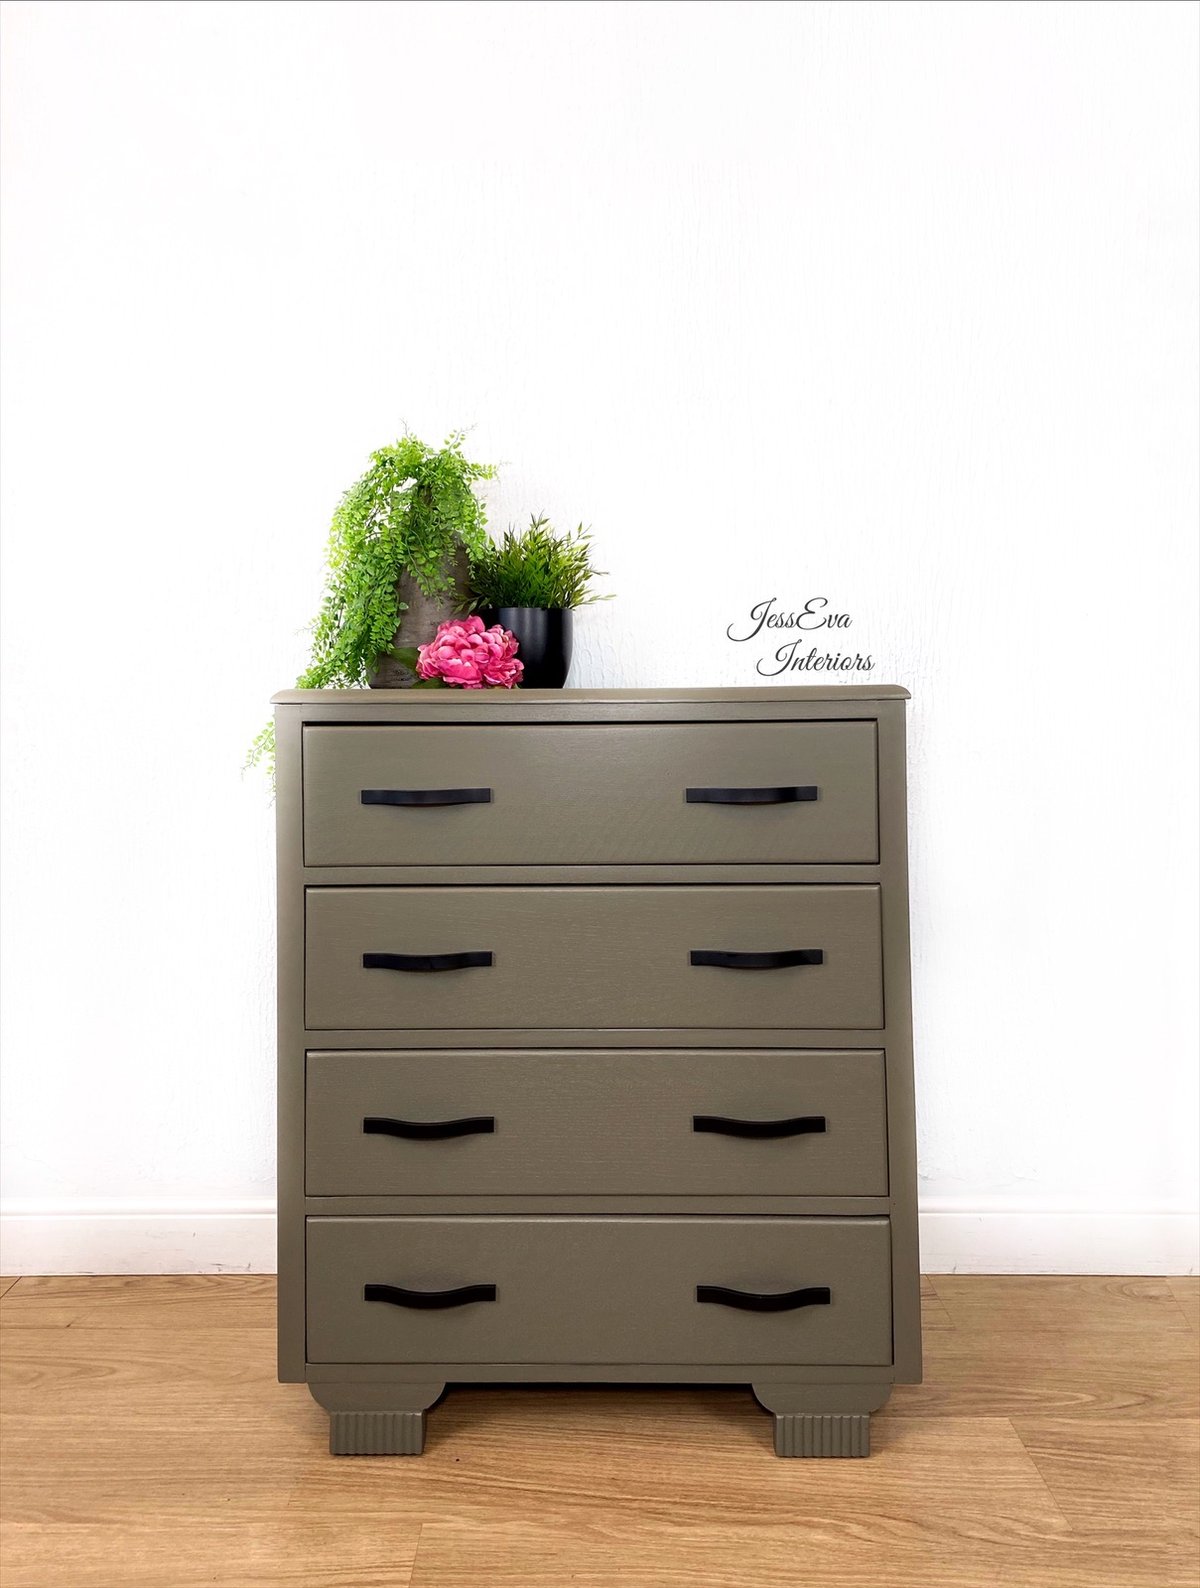 Vintage Chest Of Drawers painted in olive green/grey